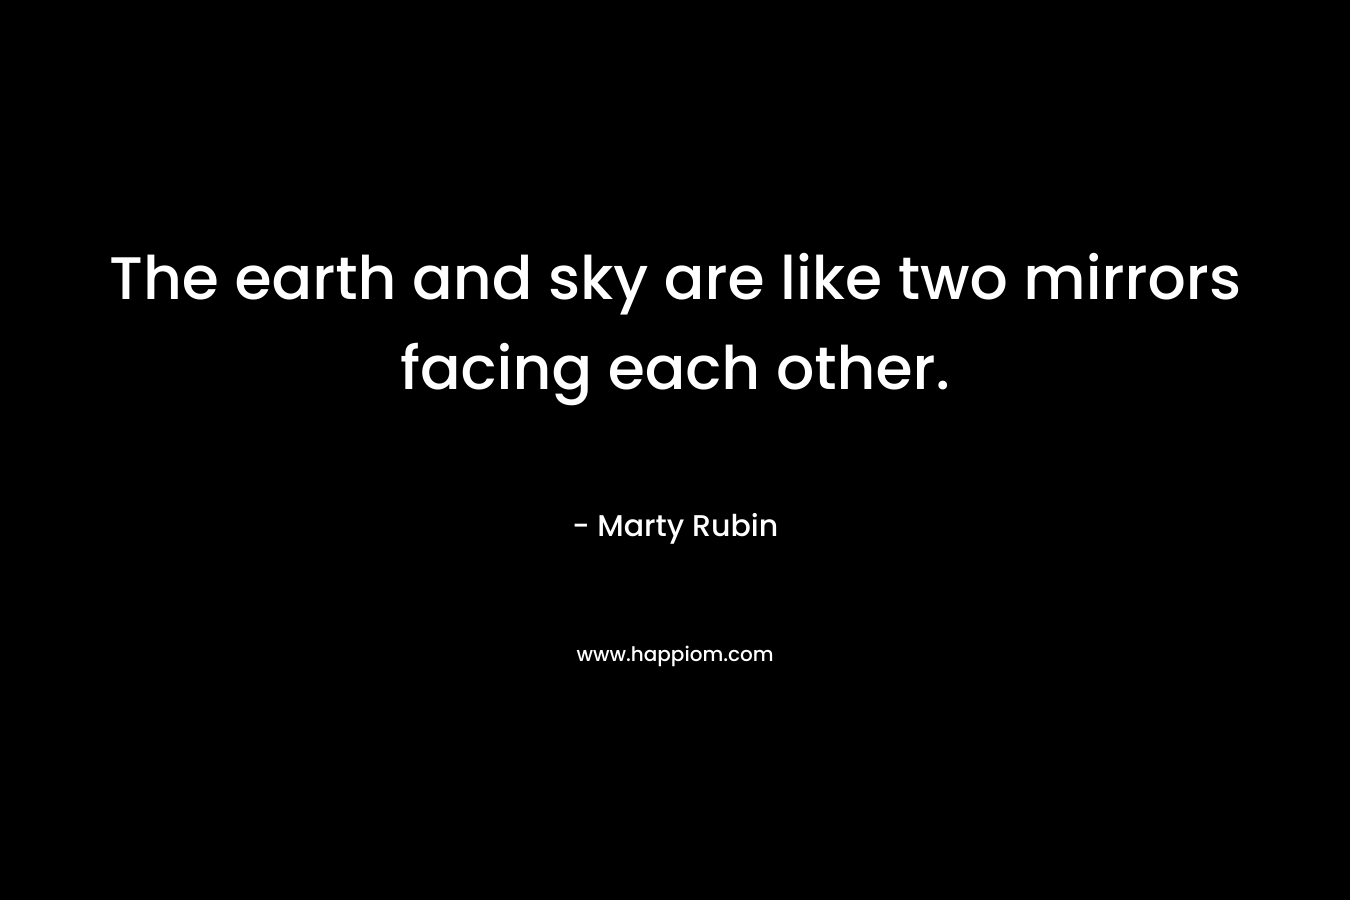 The earth and sky are like two mirrors facing each other. – Marty Rubin